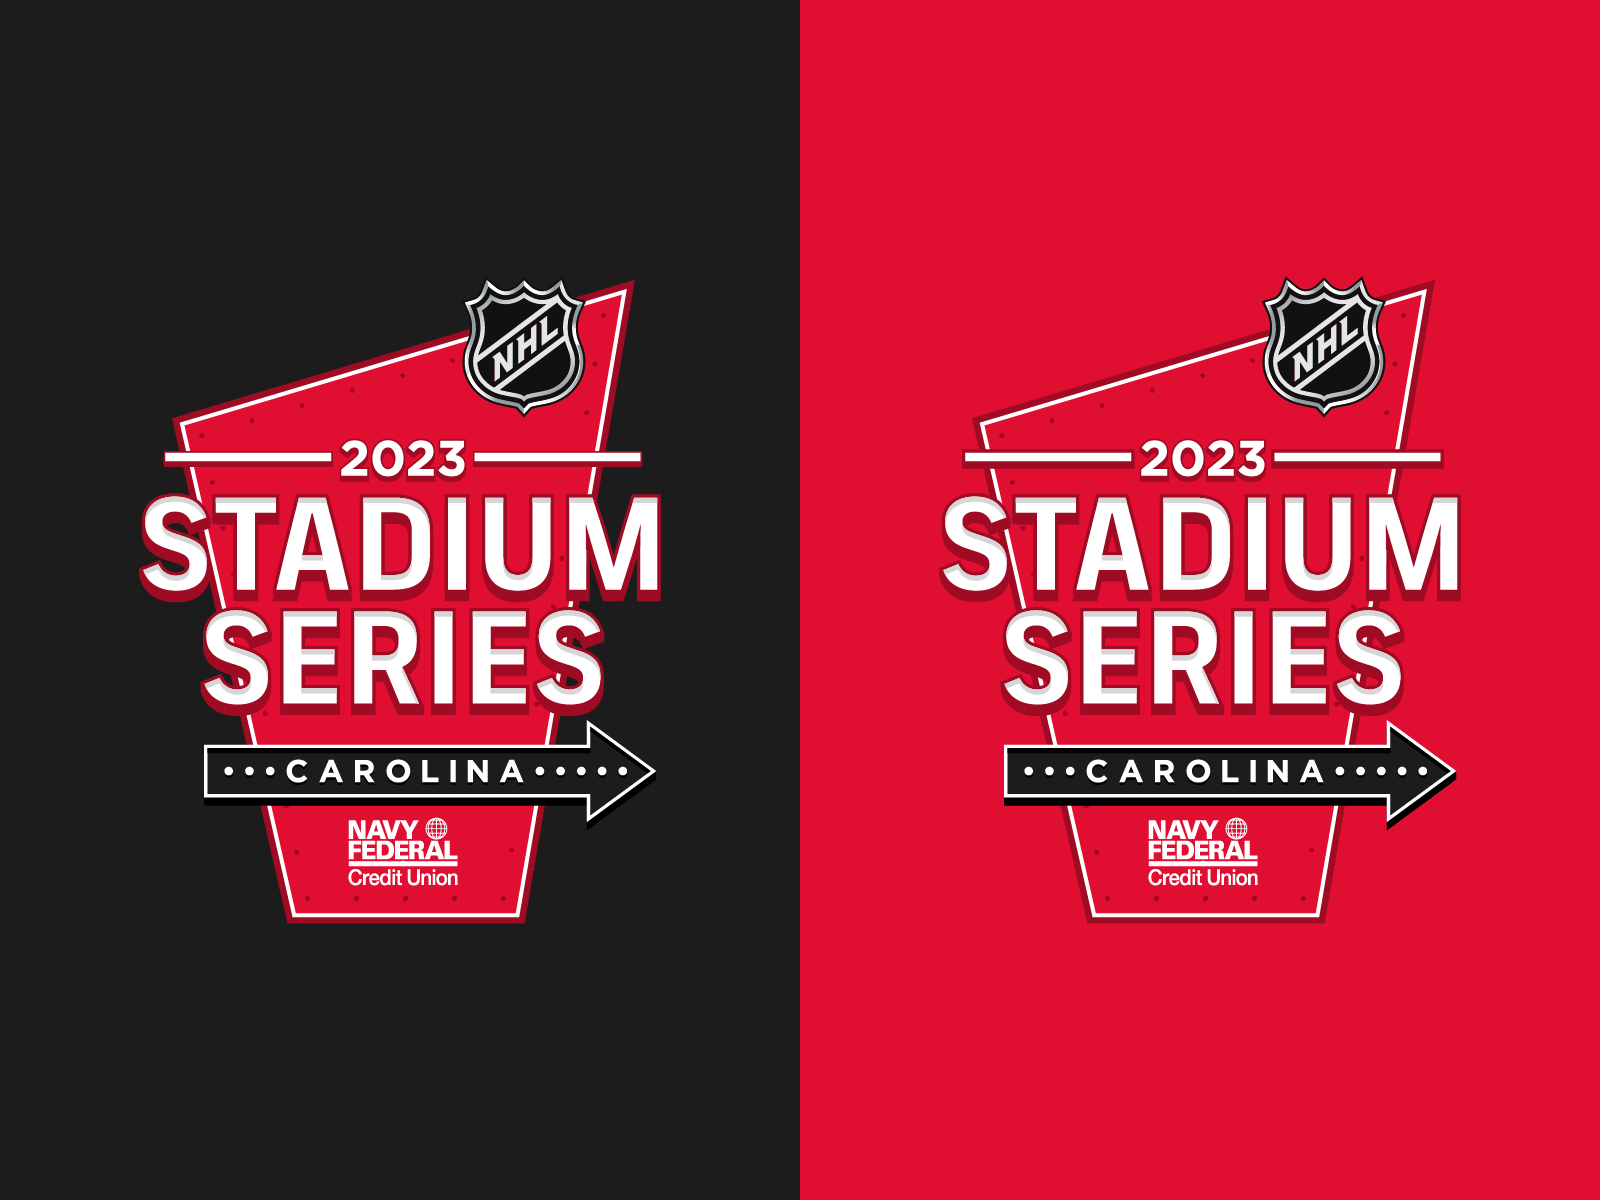 NHL announces new details and rendering for 2023 Stadium Series